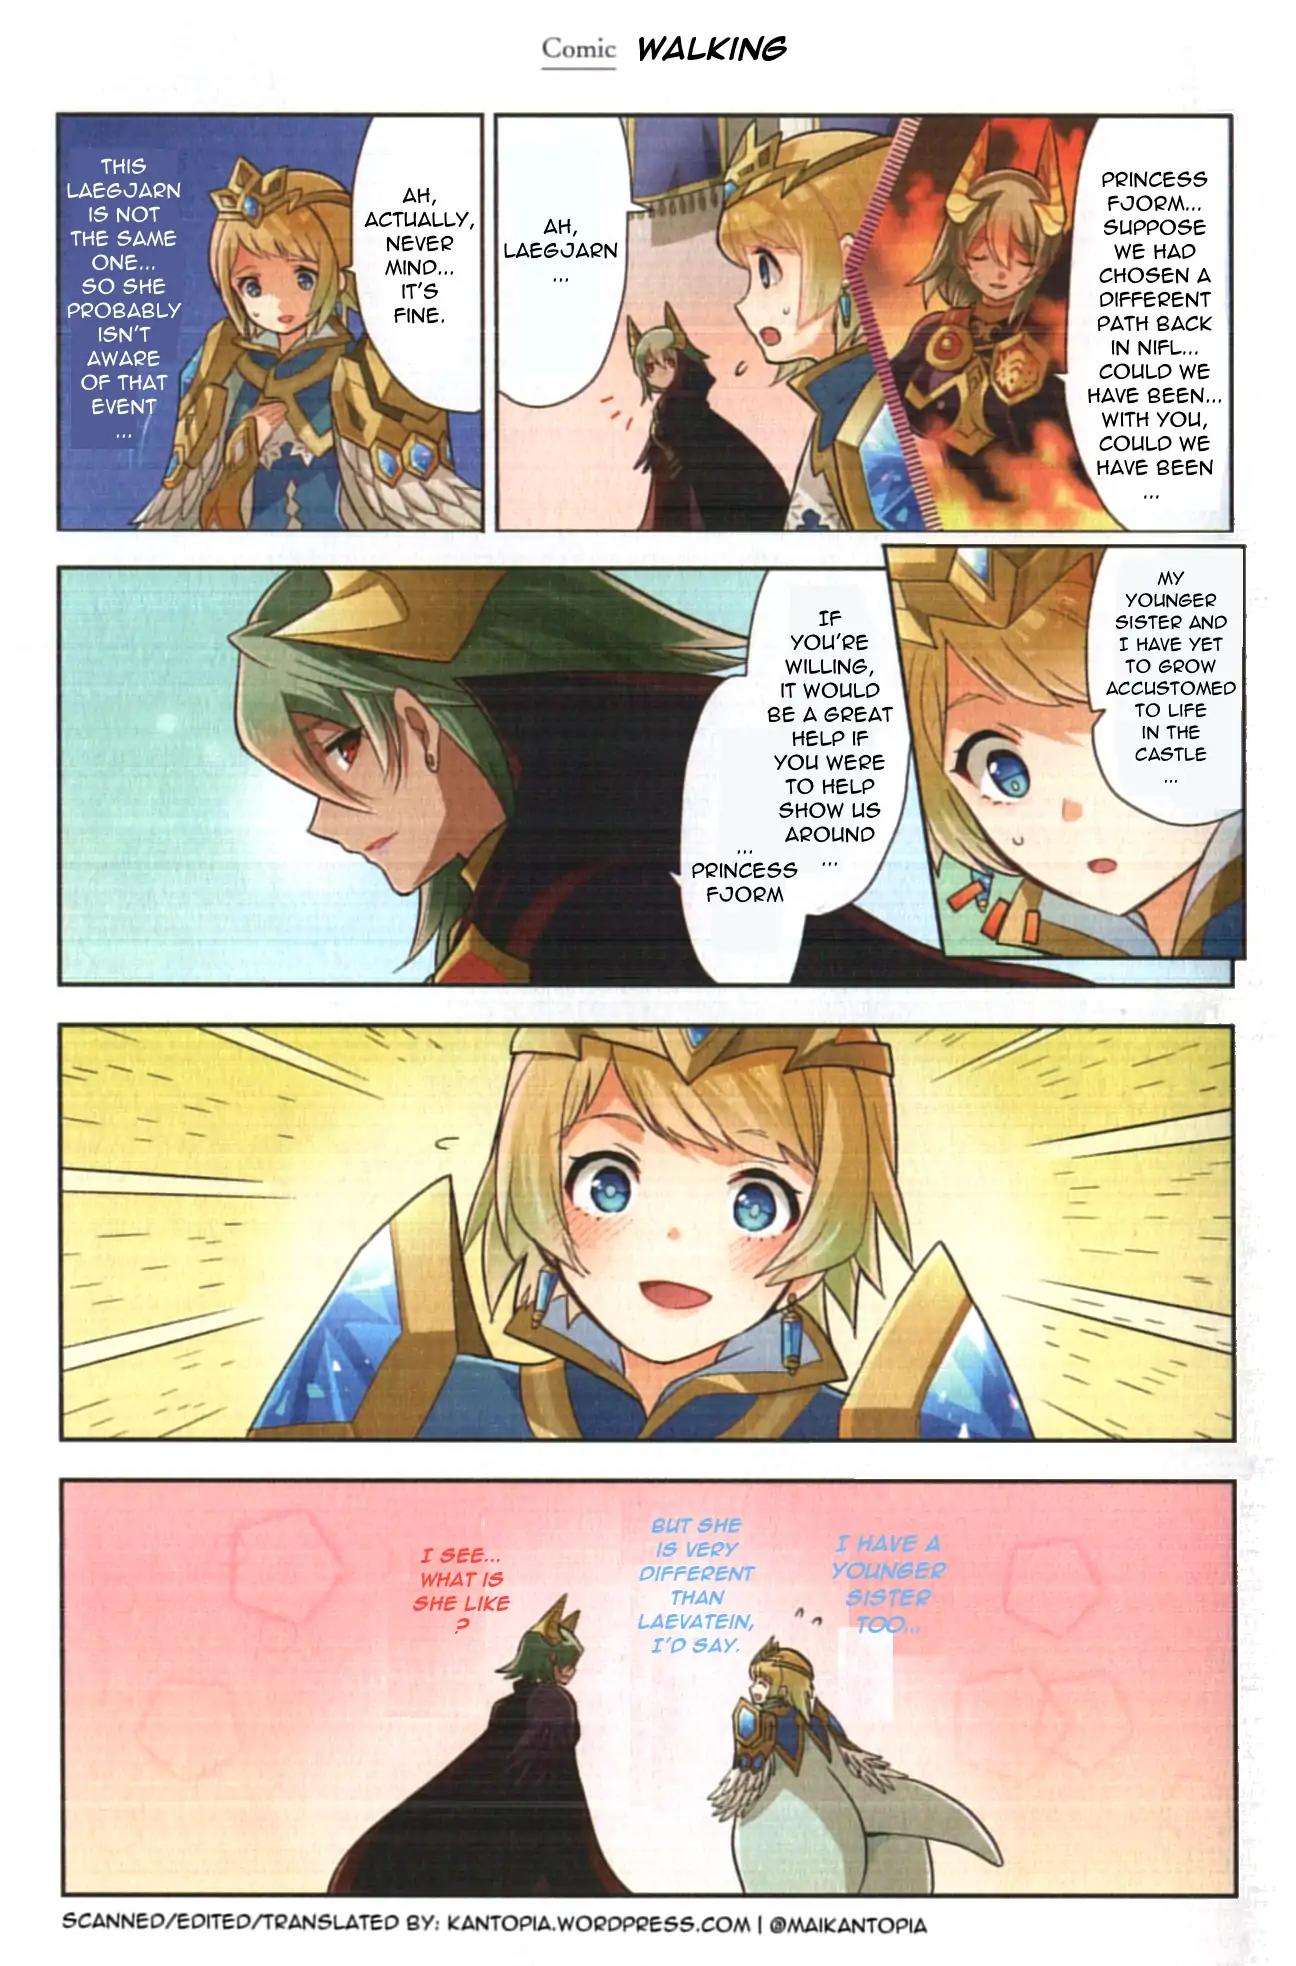 Fire Emblem Heroes Daily Lives of the Heroes Vol.1 Chapter 0.08: Character comic: